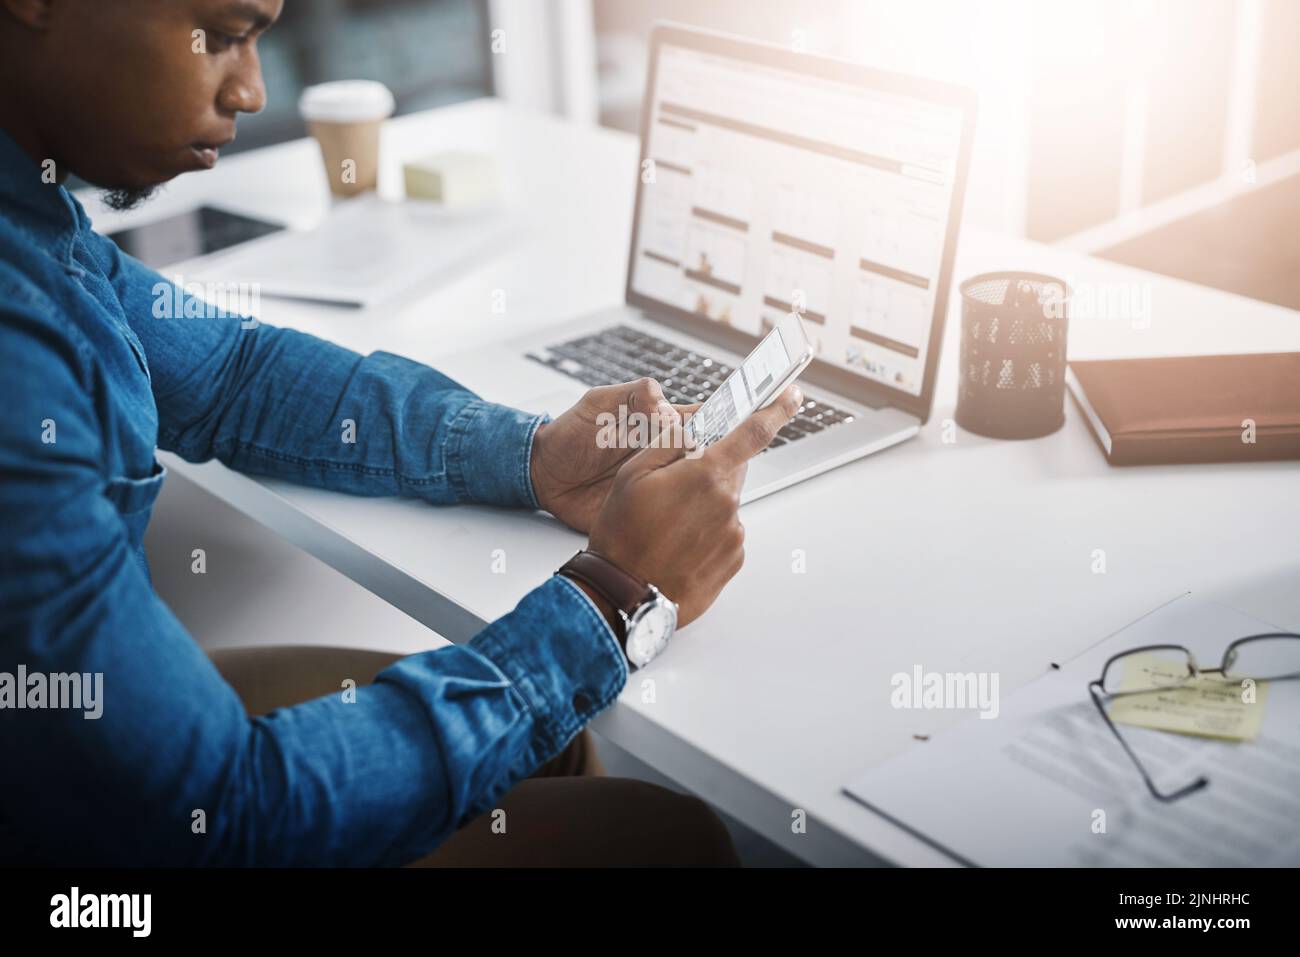 Using multiple devices to get the job done. Closeup shot of an unrecognizable businessman using a cellphone and laptop in an office. Stock Photo